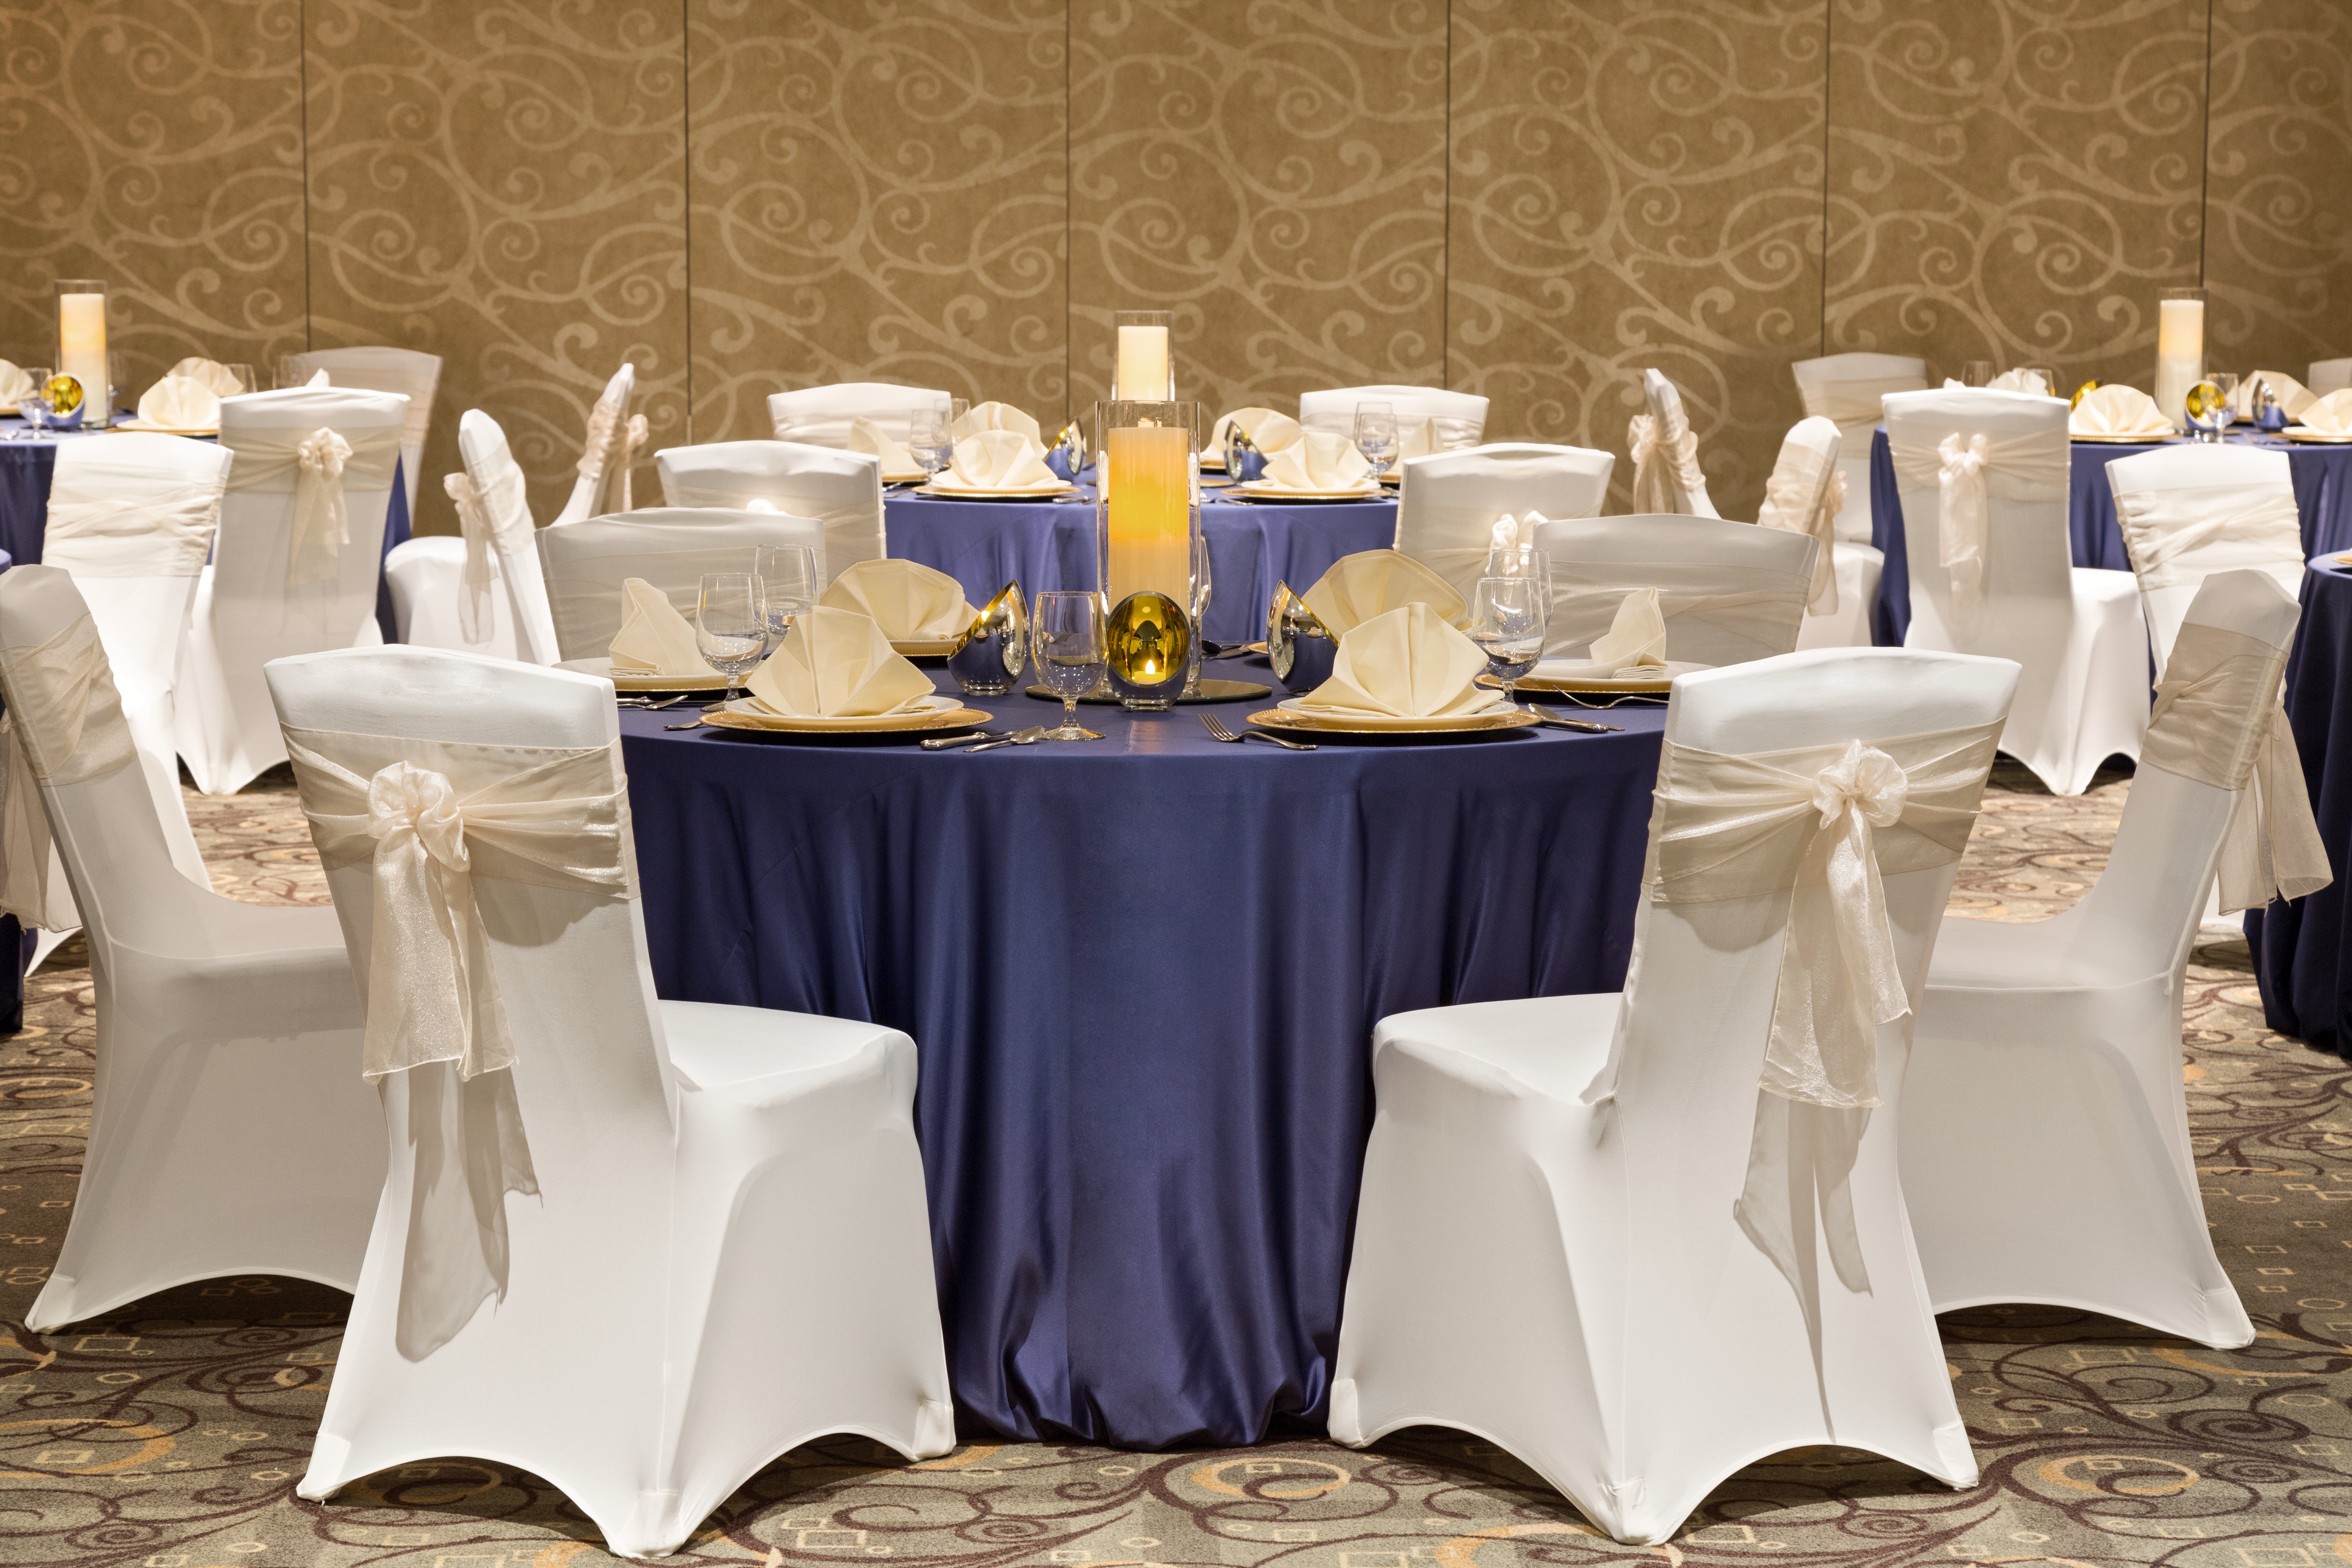 Ballroom Set Up With Place Settings on Round Tables With Purple Tablecloths and Chairs With White Covers